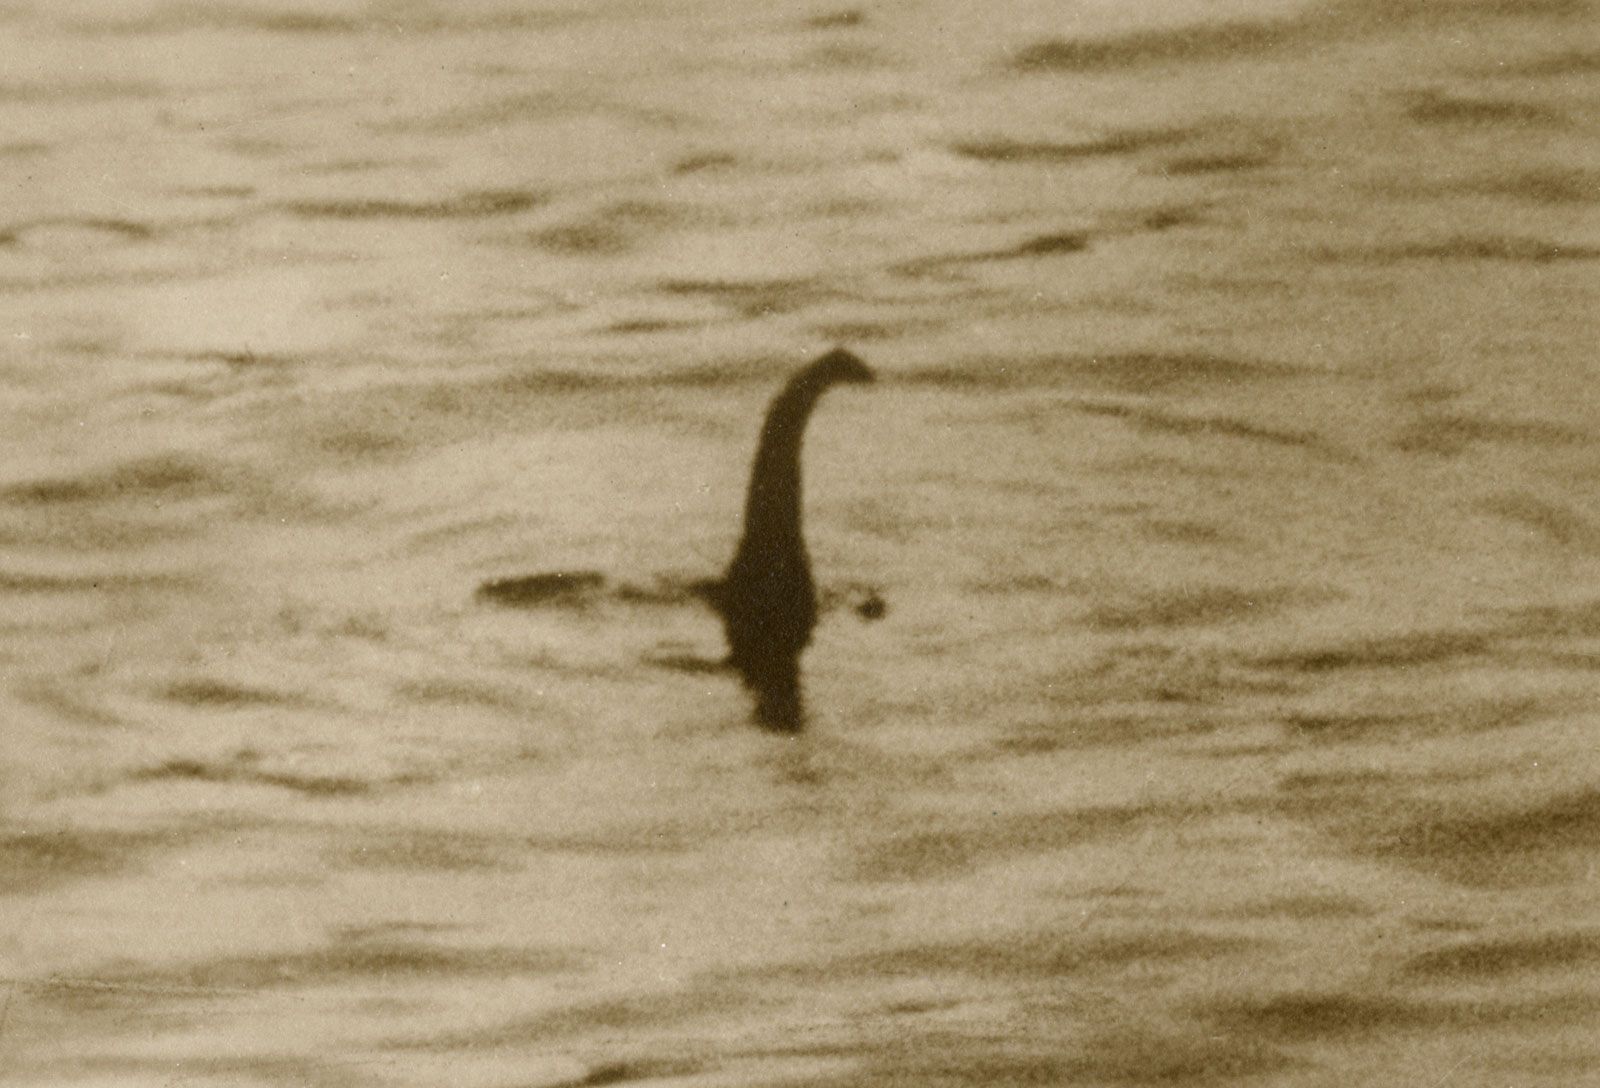 Loch Ness monster. History, Sightings, & Facts